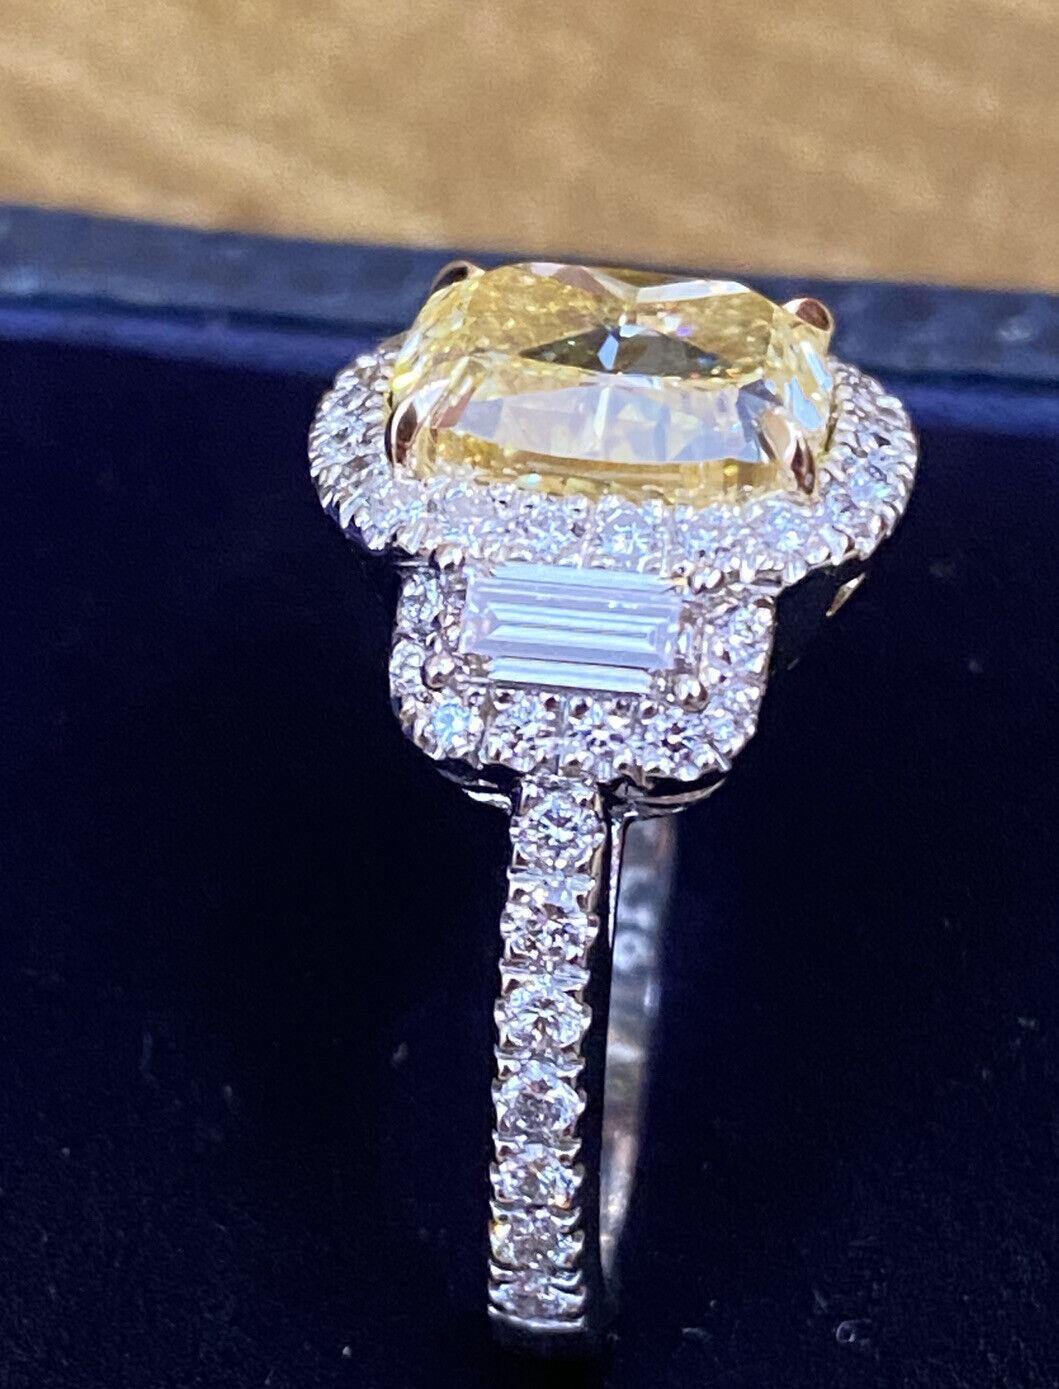 GIA 4.02 Carat Fancy Yellow Cushion VS1 Diamond Ring in Platinum and 18k Gold For Sale 5